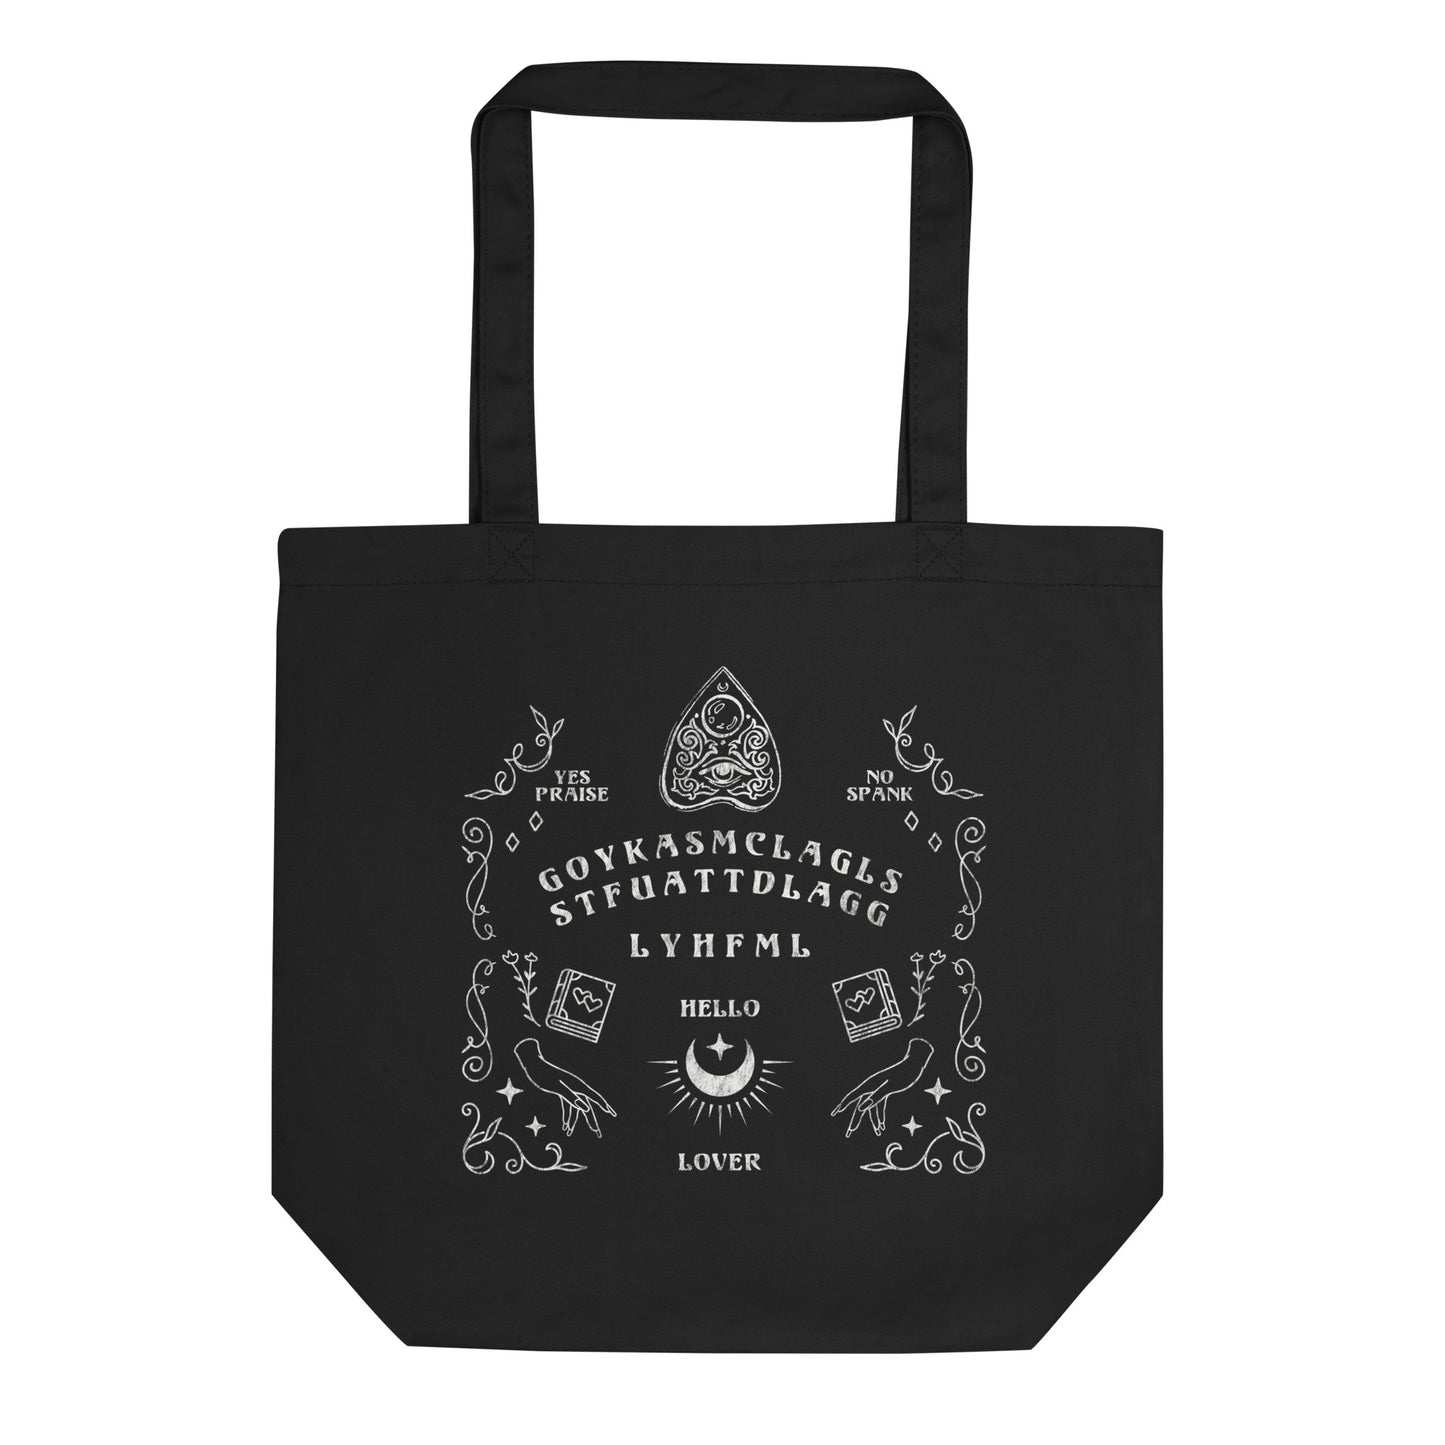 Smutty book tote in a ouija board design that reads GOYKASMCLAGLS and STFUATTDLAGG 